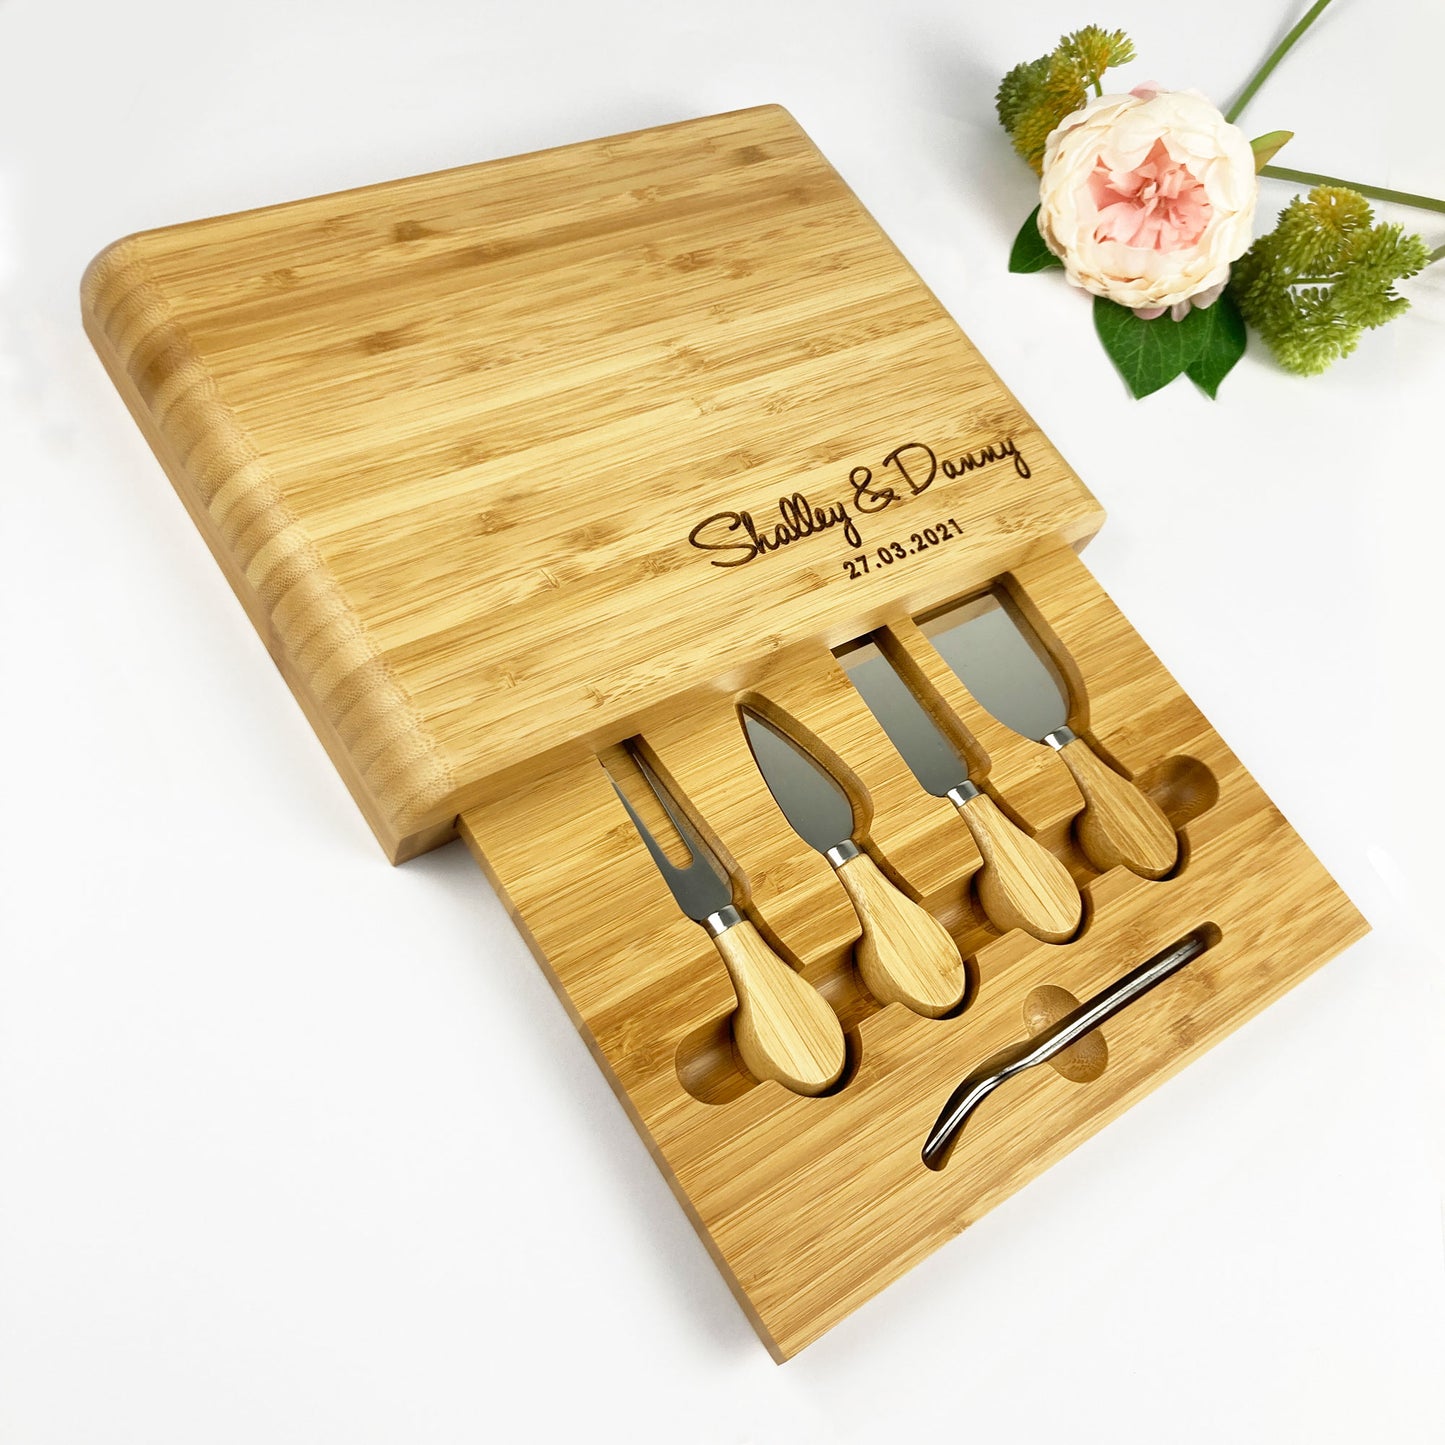 Wooden Cheese Cutting Board Gift Set with Knives Wedding Anniversary Newly Weds